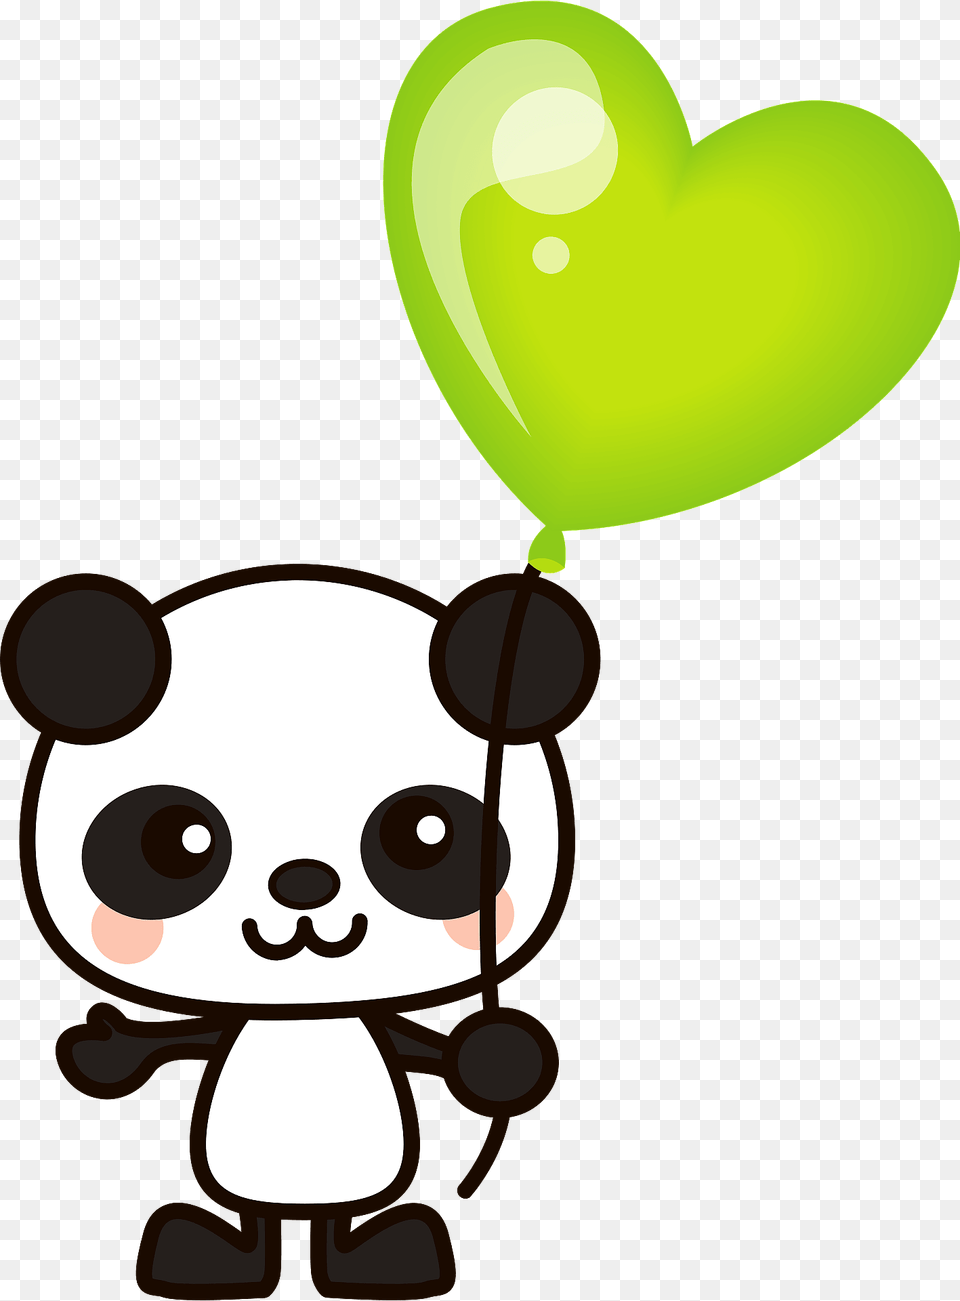 Giant Panda Is Holding A Heart Balloon Clipart Free Png Download